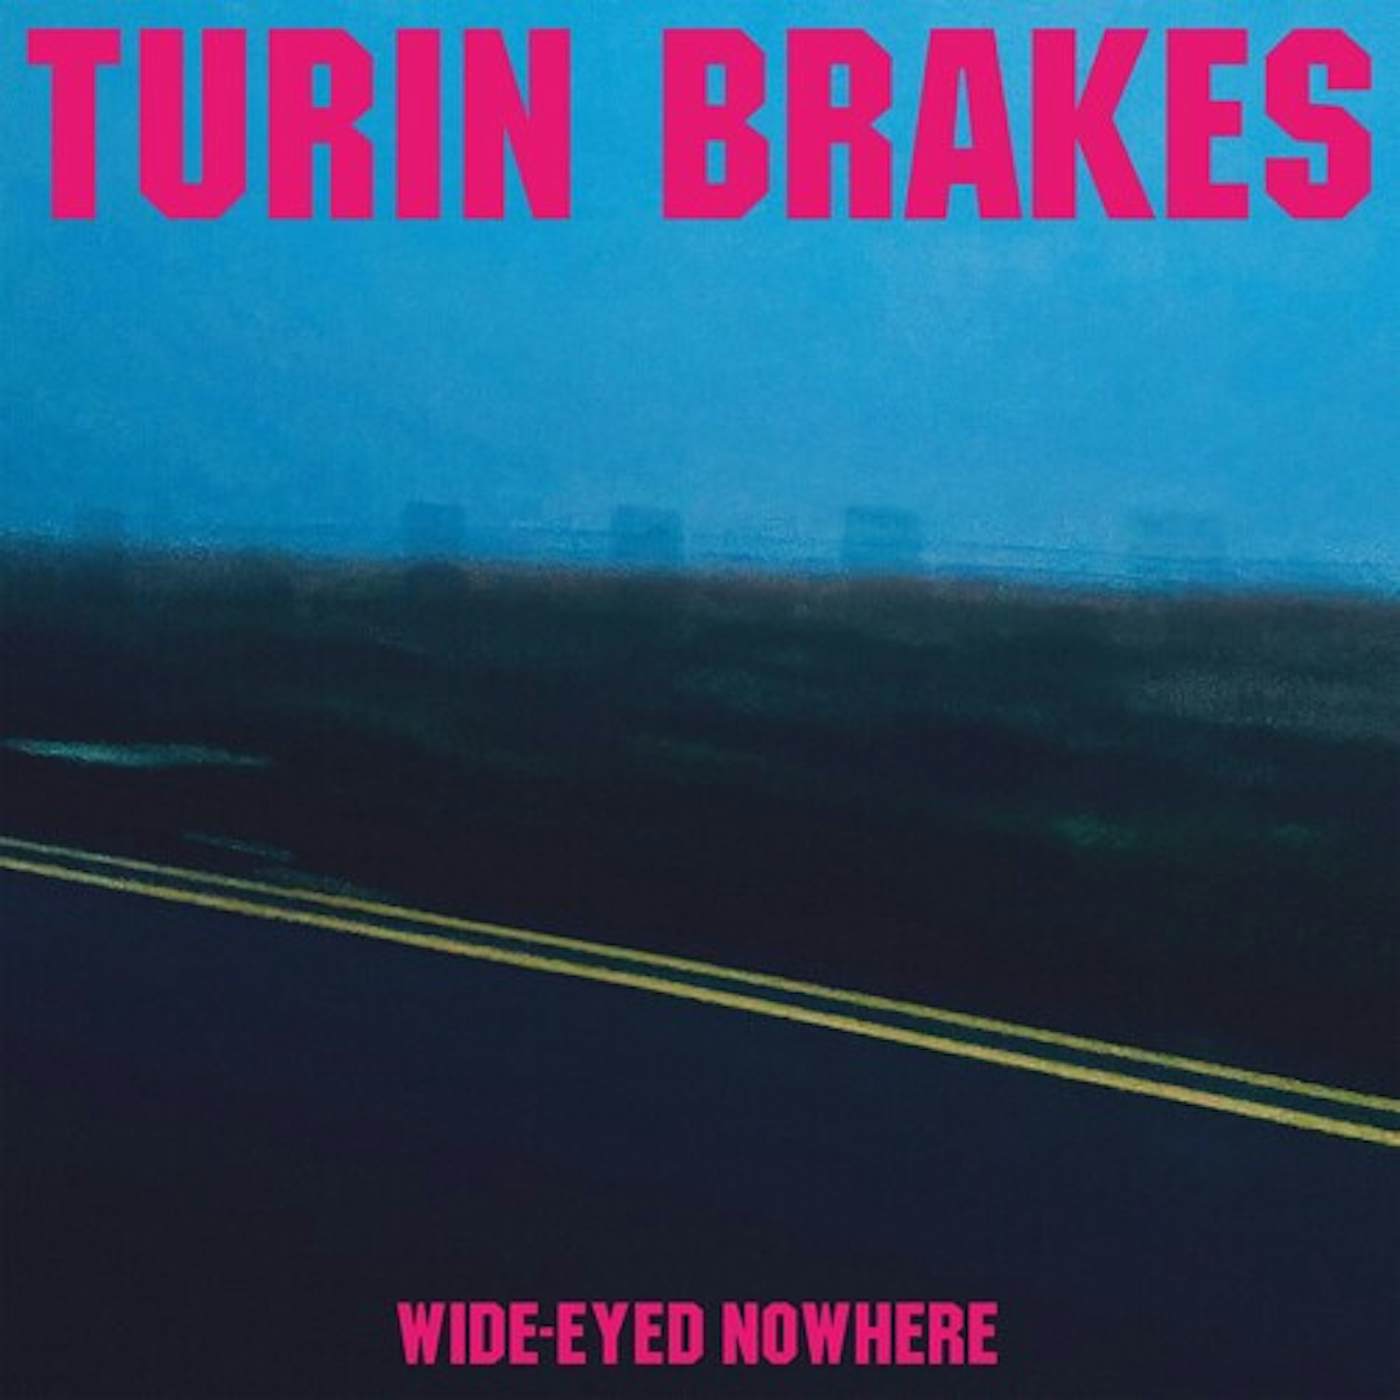 Turin Brakes WIDE-EYED NOWHERE CD